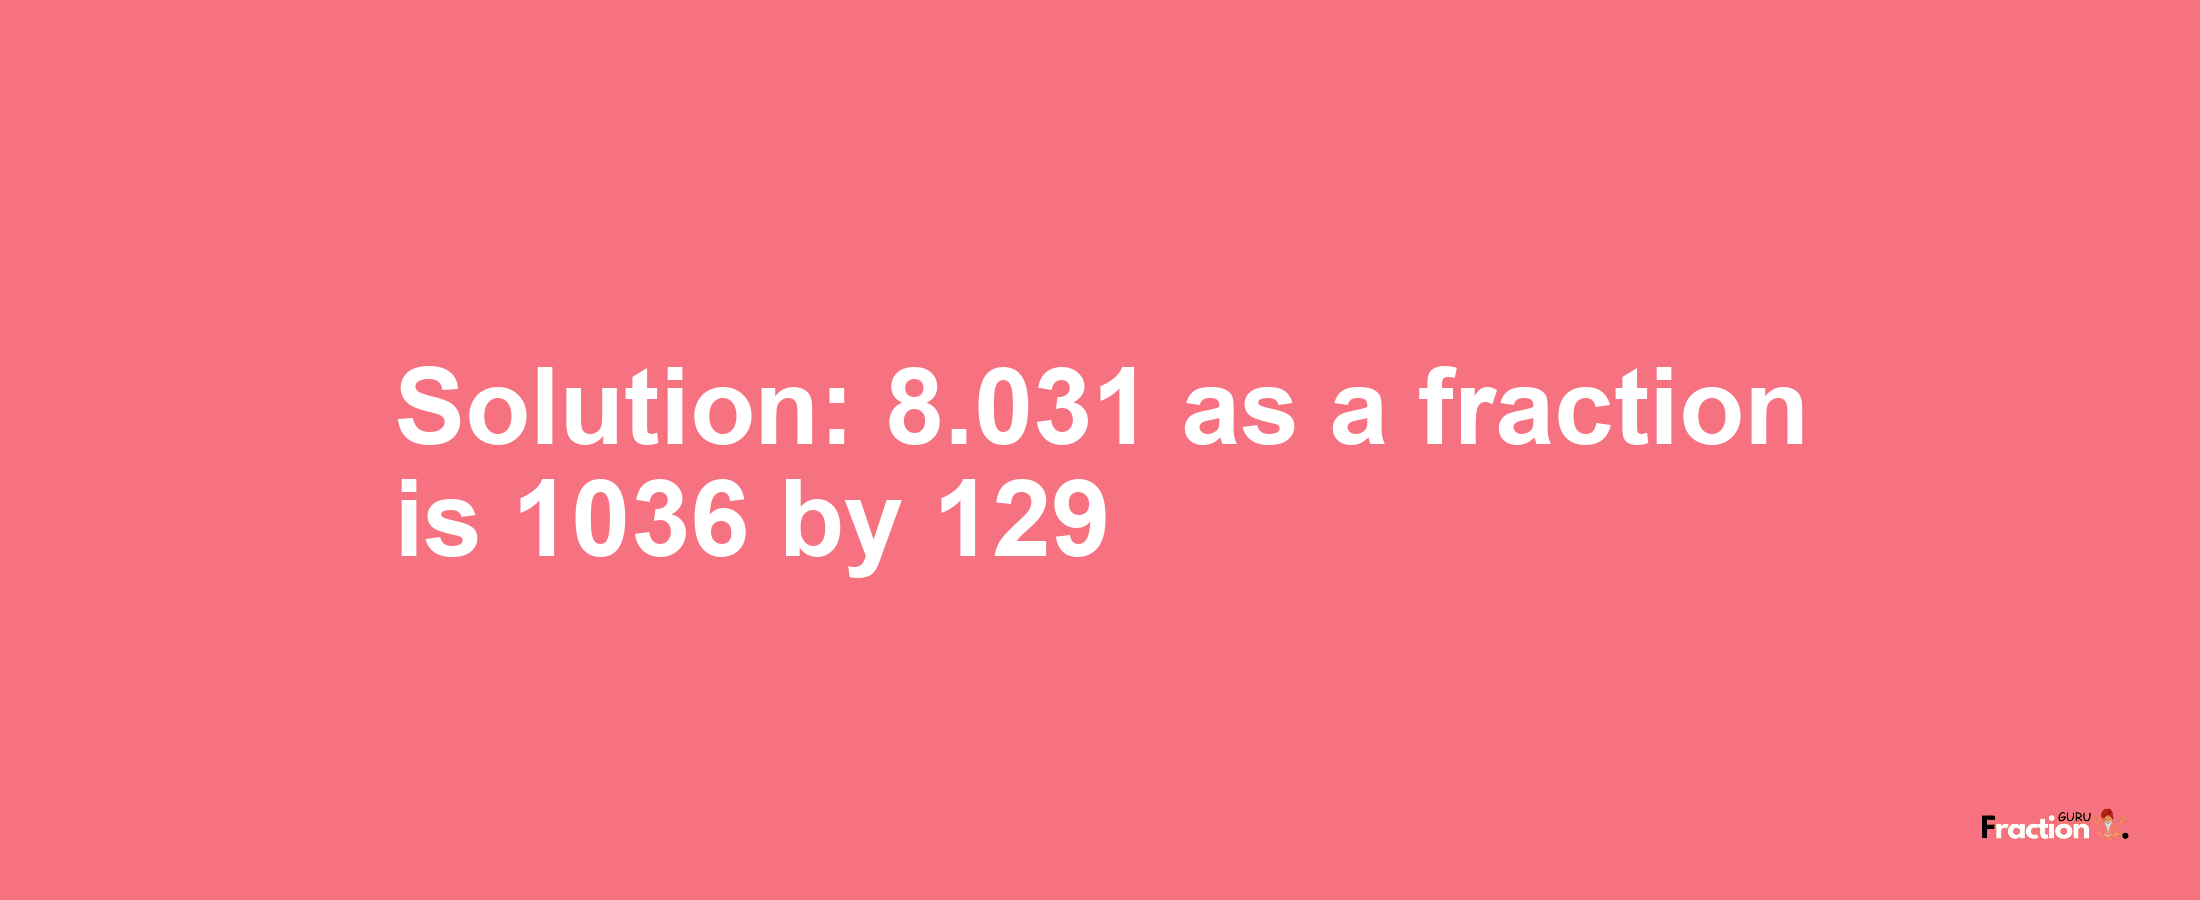 Solution:8.031 as a fraction is 1036/129